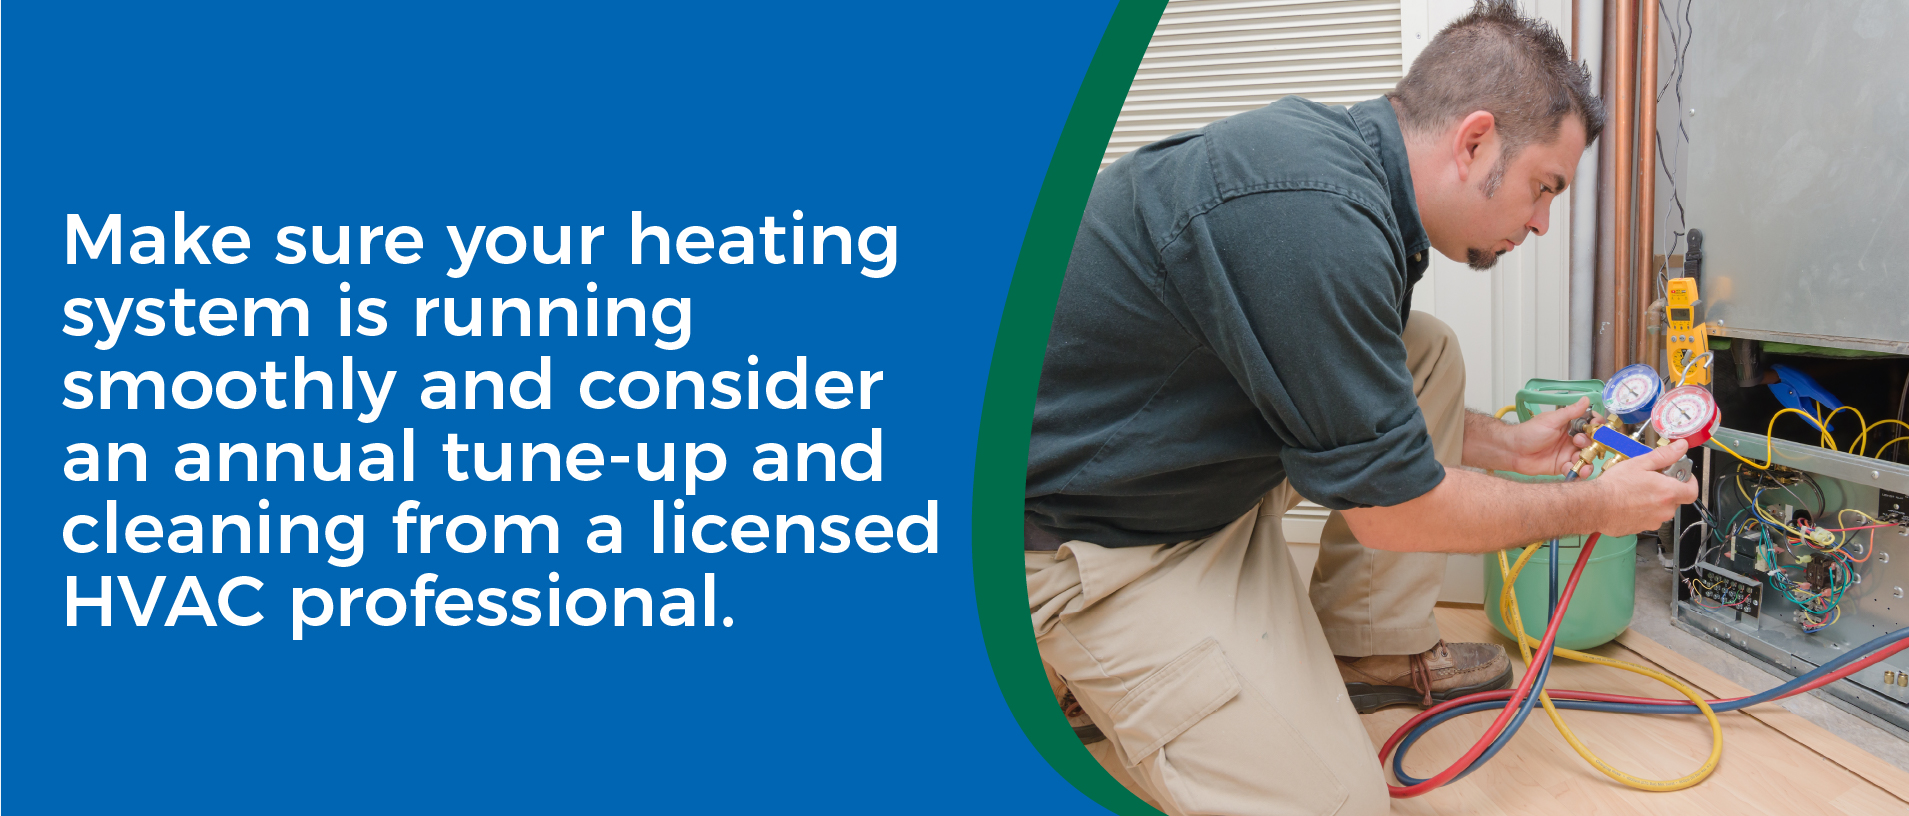 Make sure your heating system is running smoothly and consider an annual tune-up from an HVAC …